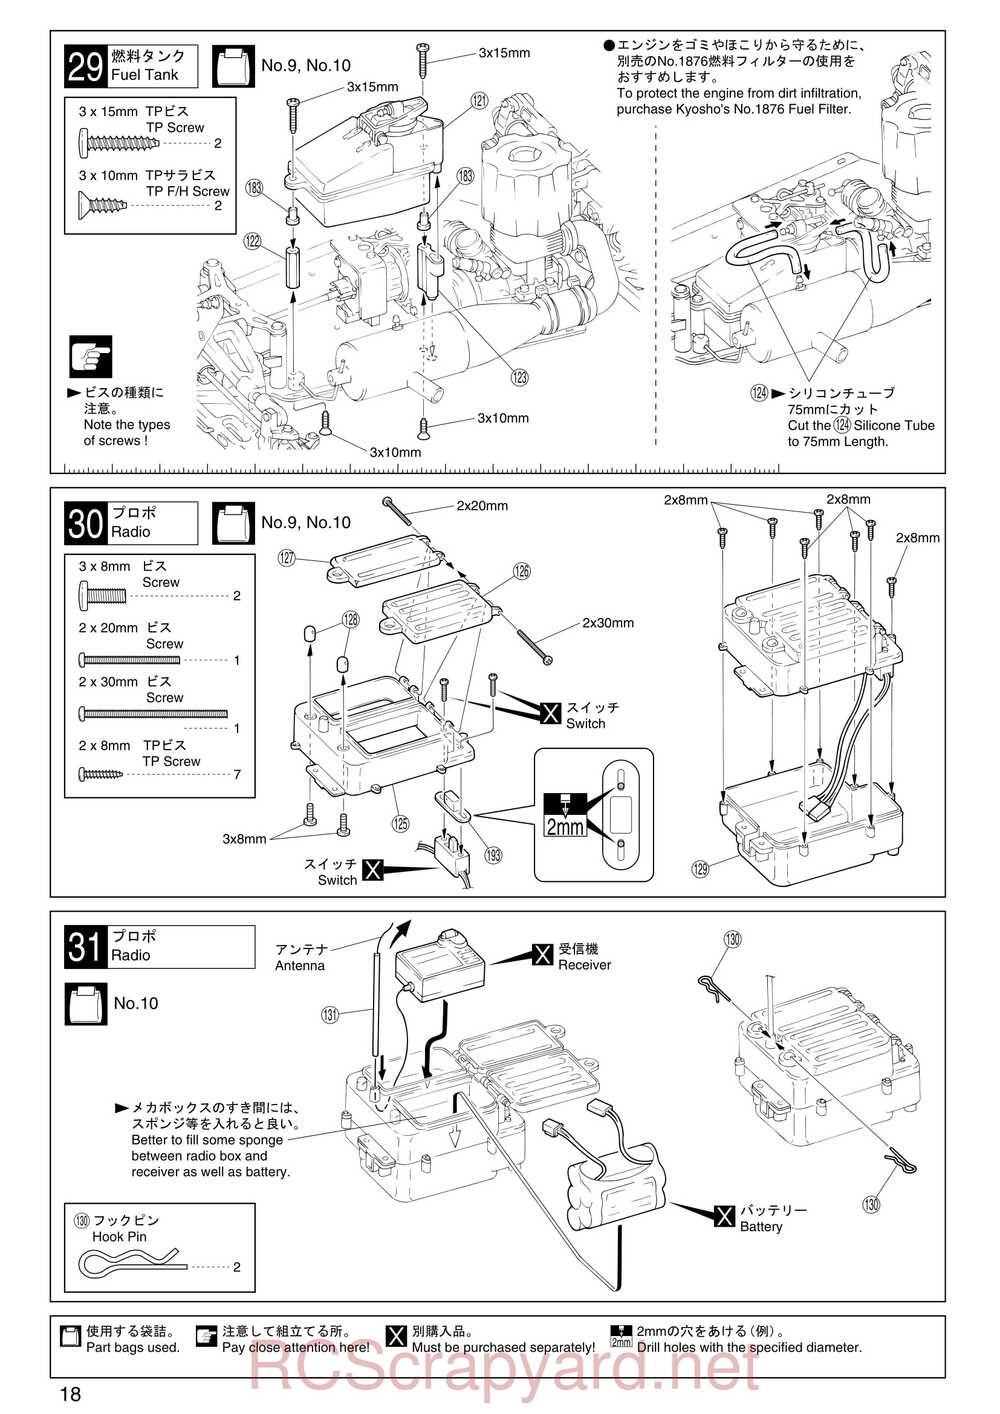 Kyosho - 31081- Inferno-MP-7-5 - Manual - Page 18